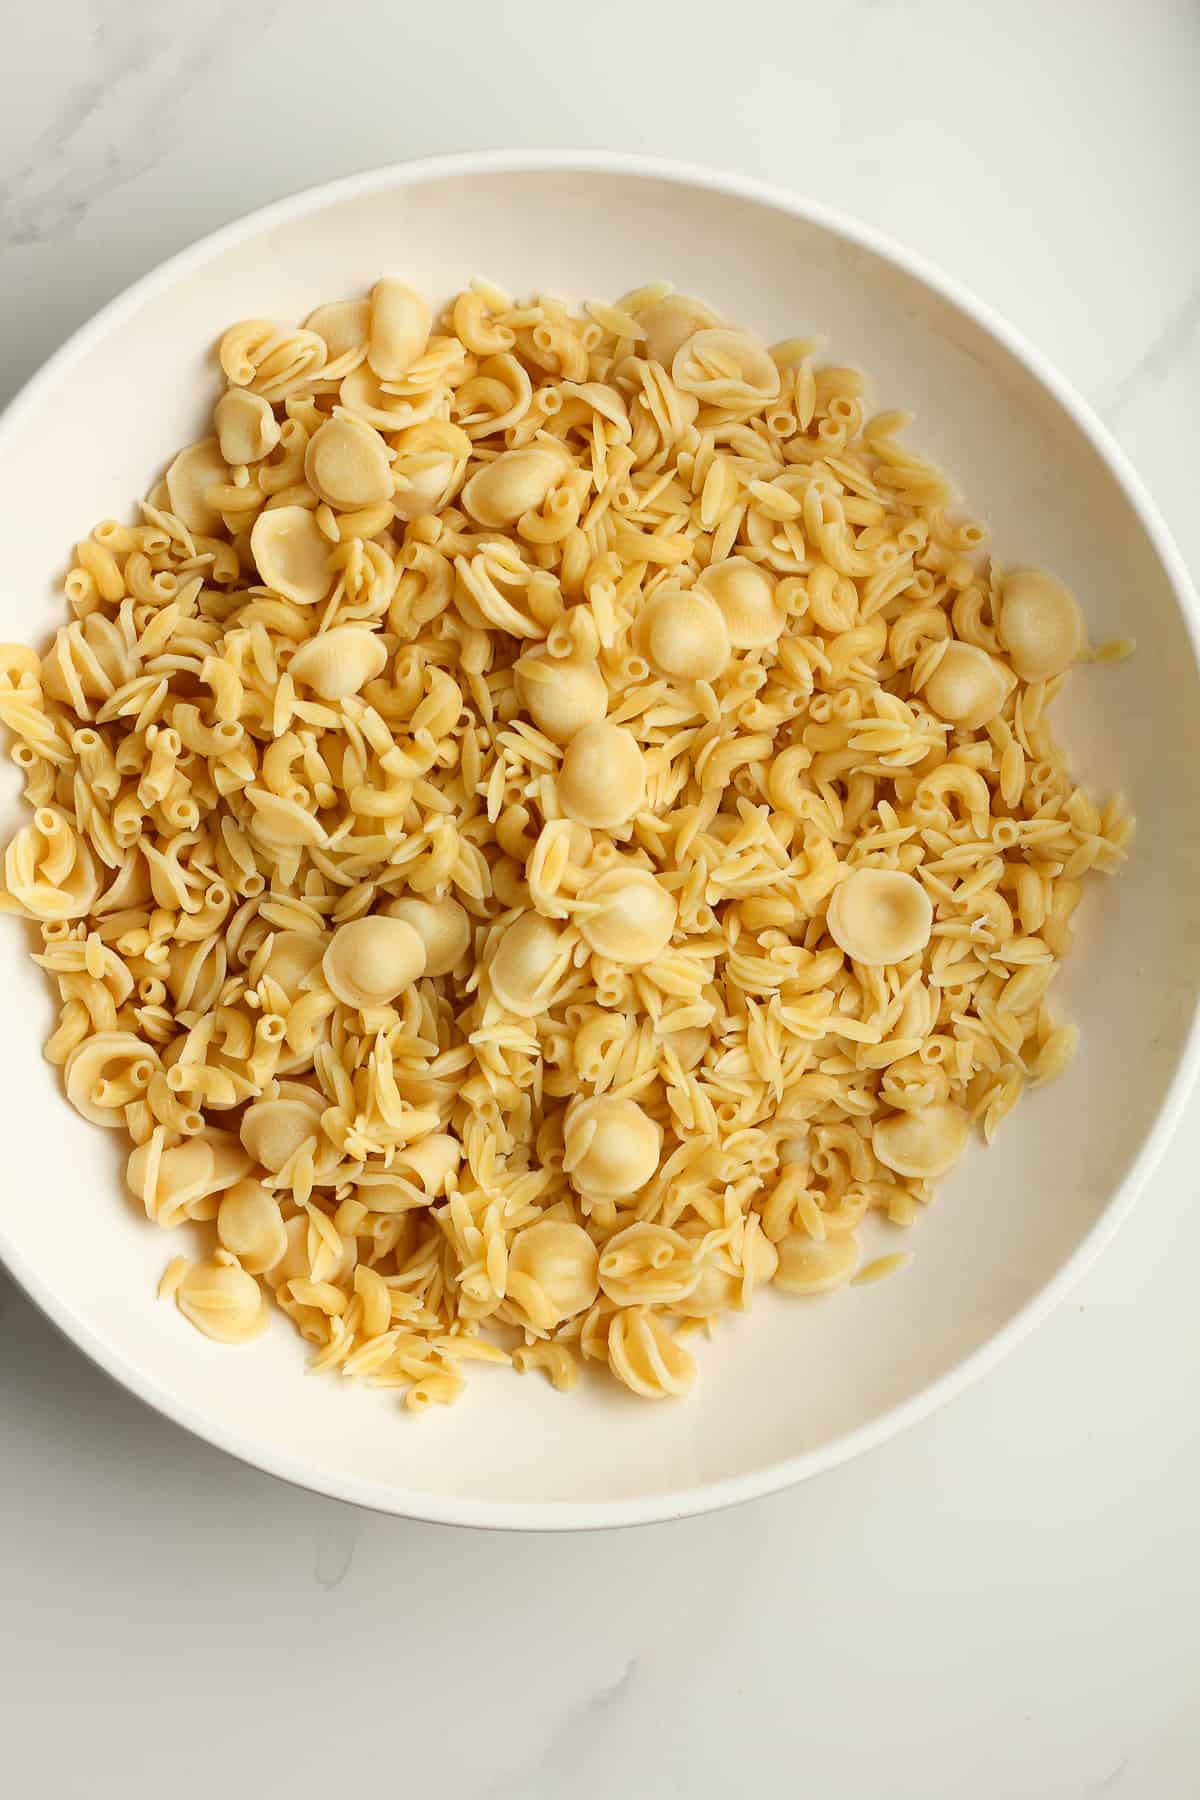 A large bowl of the cooked pasta.